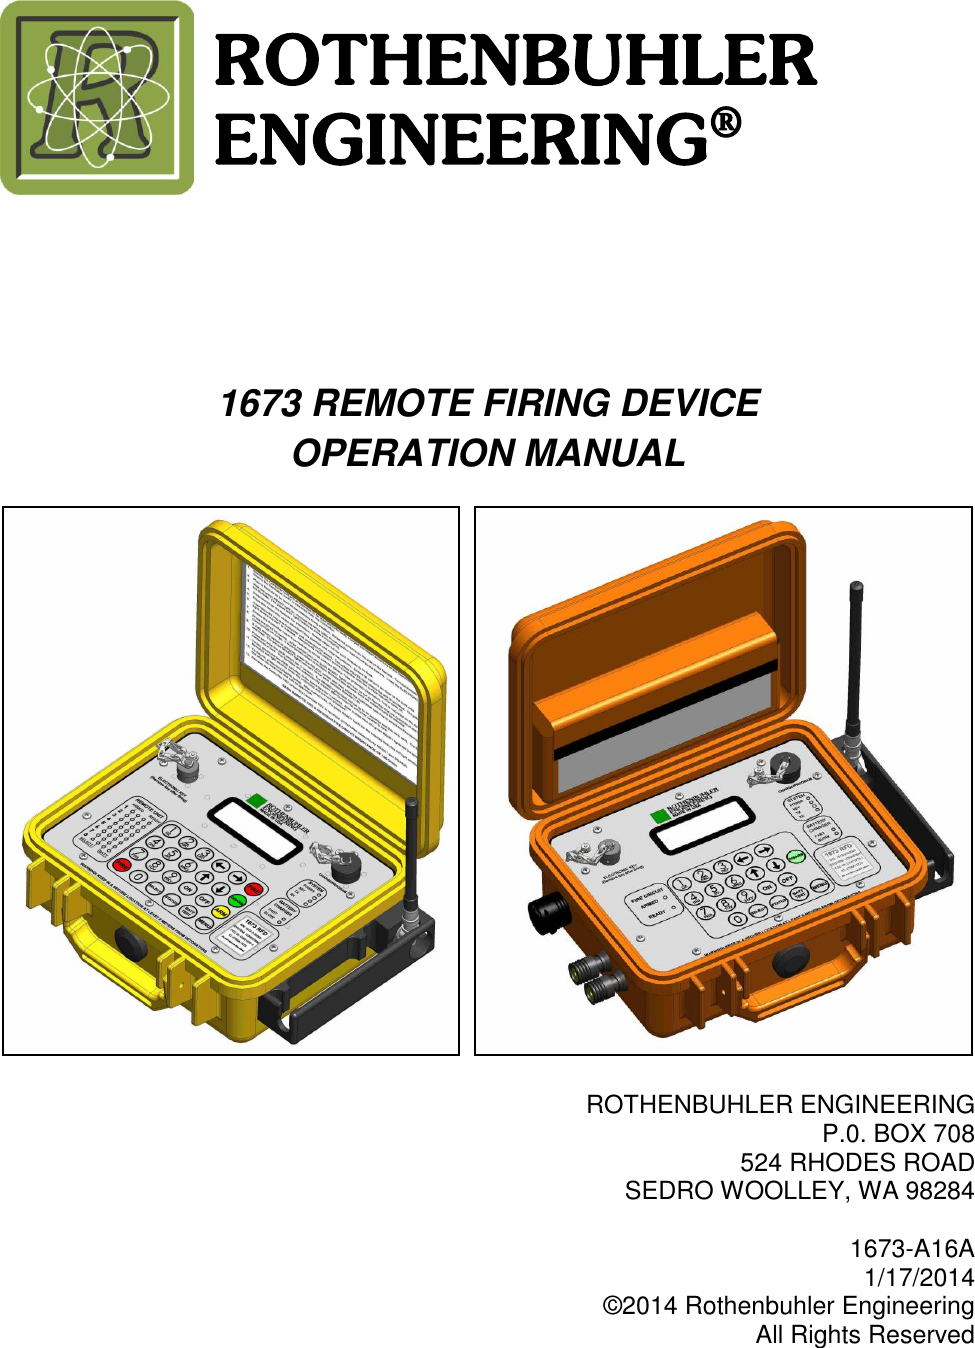      1673 REMOTE FIRING DEVICE OPERATION MANUAL      ROTHENBUHLER ENGINEERING P.0. BOX 708 524 RHODES ROAD SEDRO WOOLLEY, WA 98284  1673-A16A  1/17/2014 ©2014 Rothenbuhler Engineering All Rights Reserved ROTHENBUHLER ENGINEERING® 